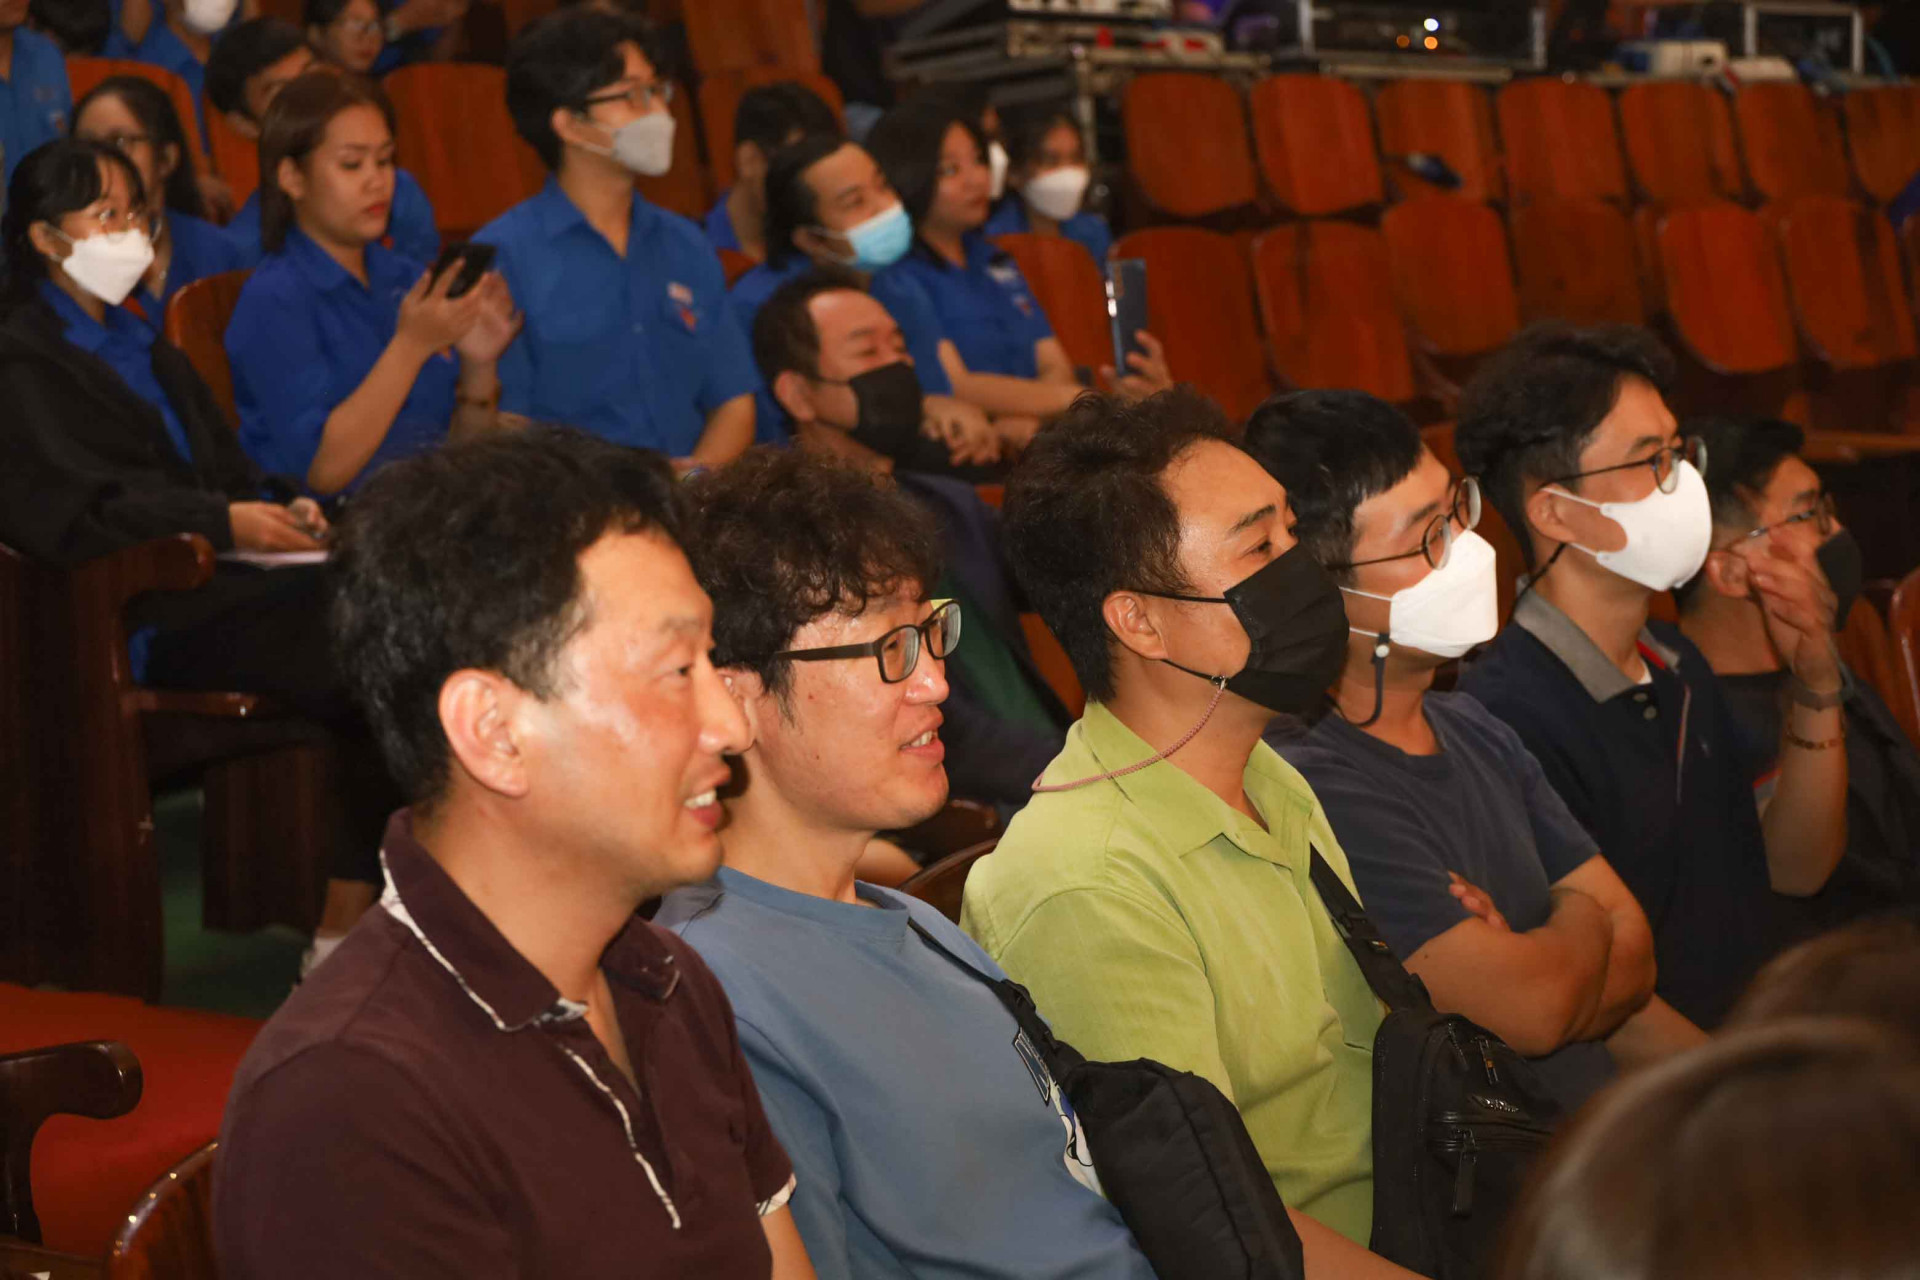 Many South Korean people who are living in Khanh Hoa come to see the program